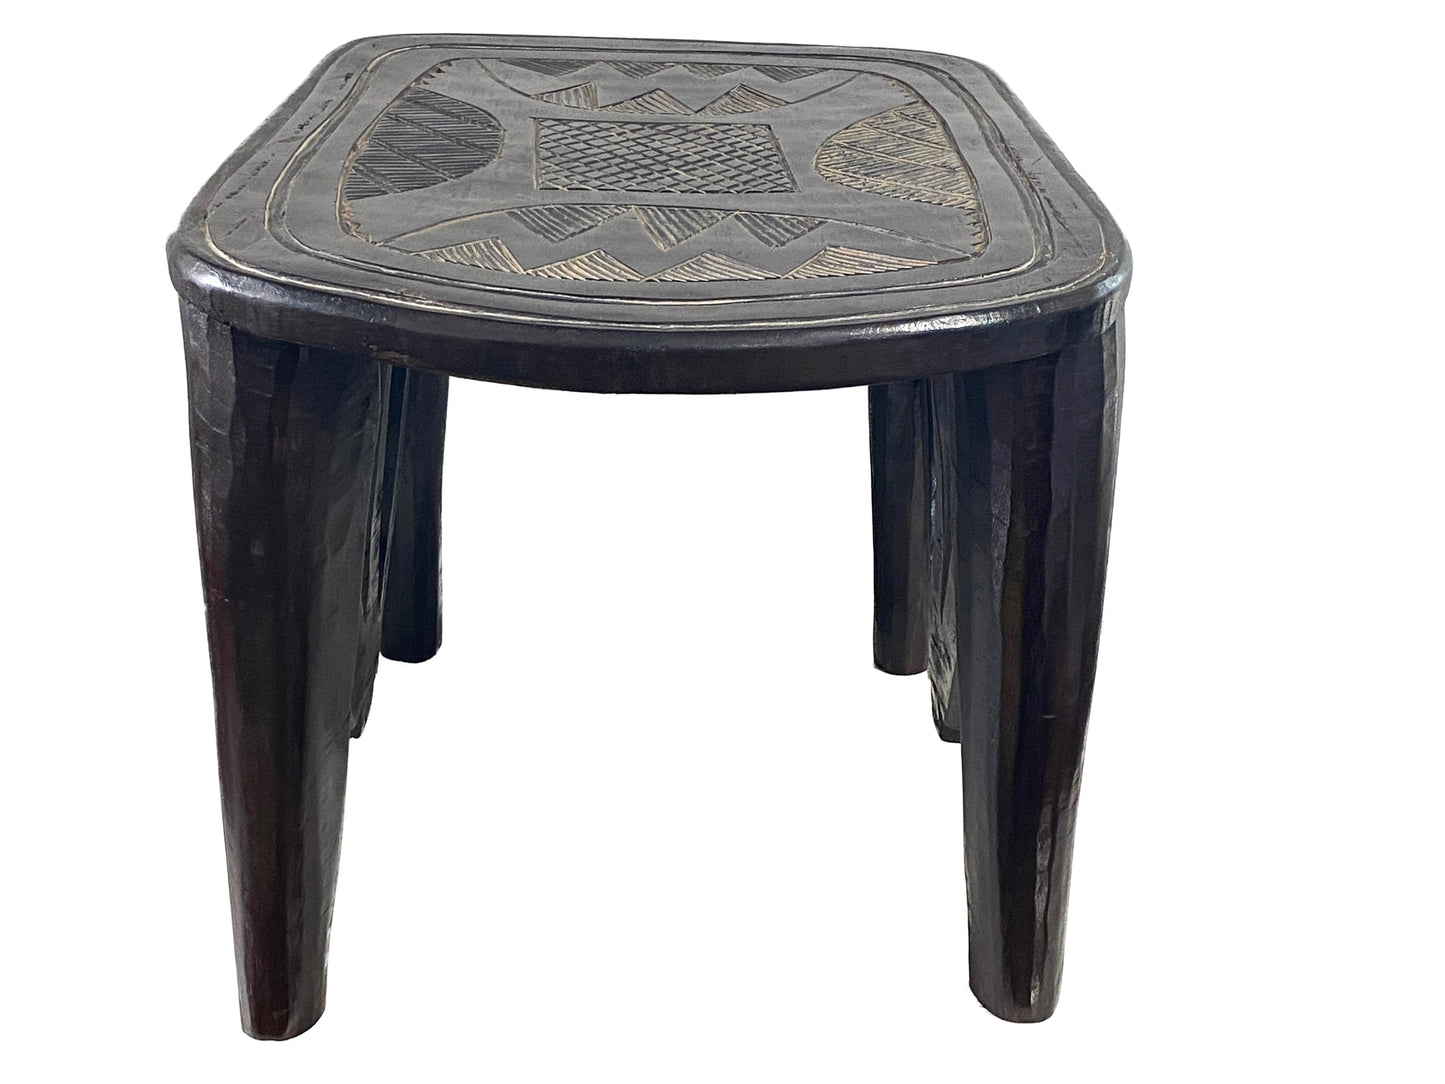 #4348 Superb African   Nupe Stool / Table Nigeria  23" W by 15.5" H